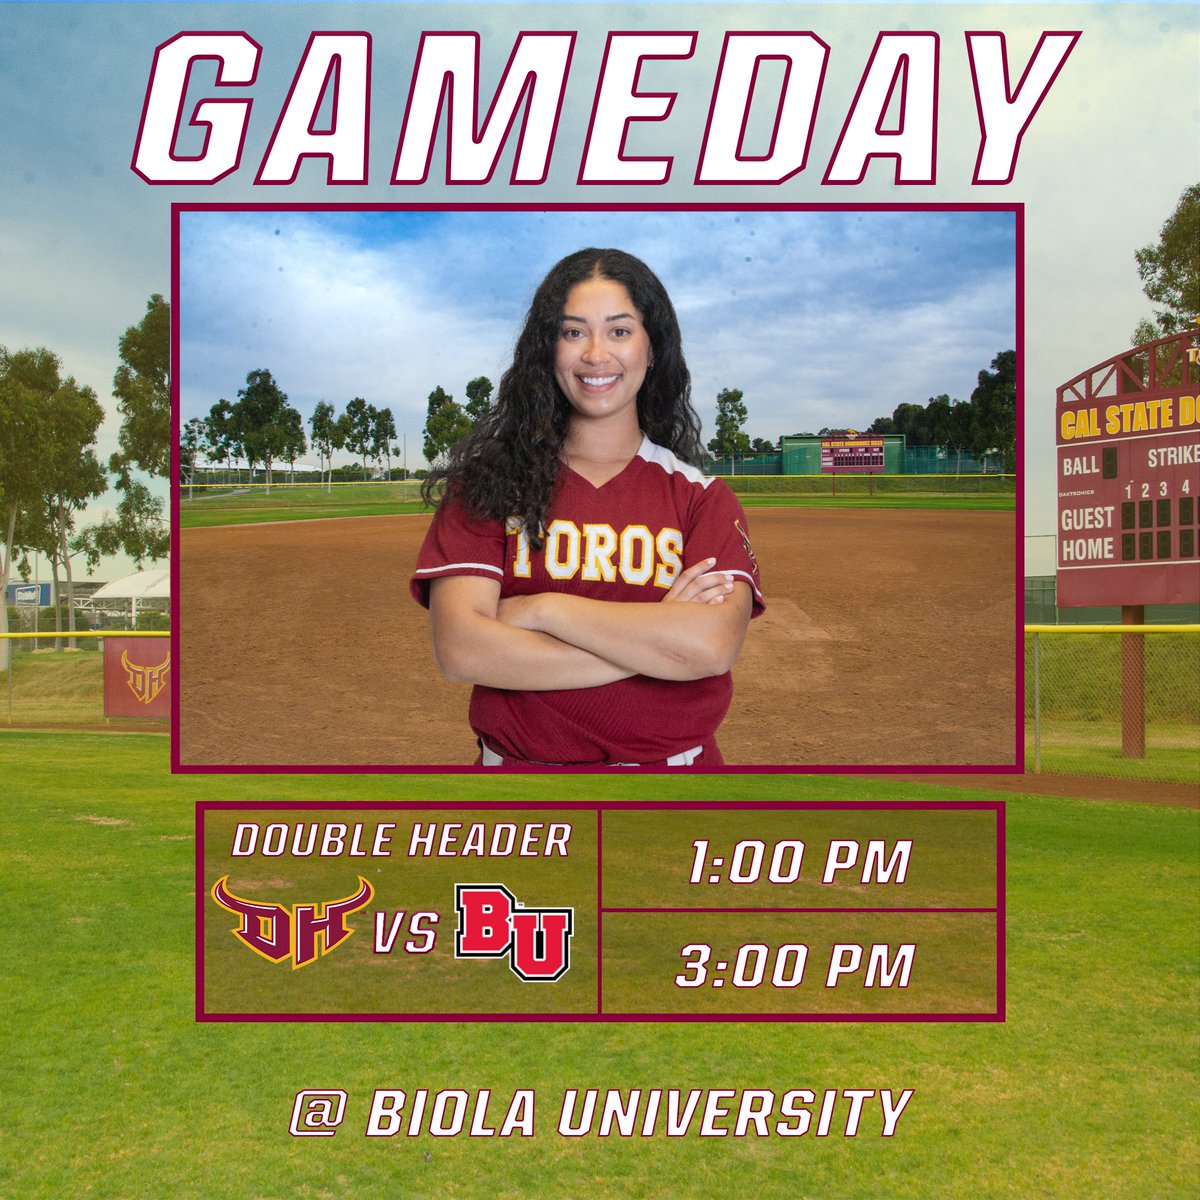 Gameday! @CSUDHsoftball opens their series against Biola University in a doubleheader today on the road. ⏰: 1 pm & 3 pm 📍: La Mirada, CA 📺: ccaanetwork.com 📊: bit.ly/3vLOiSE